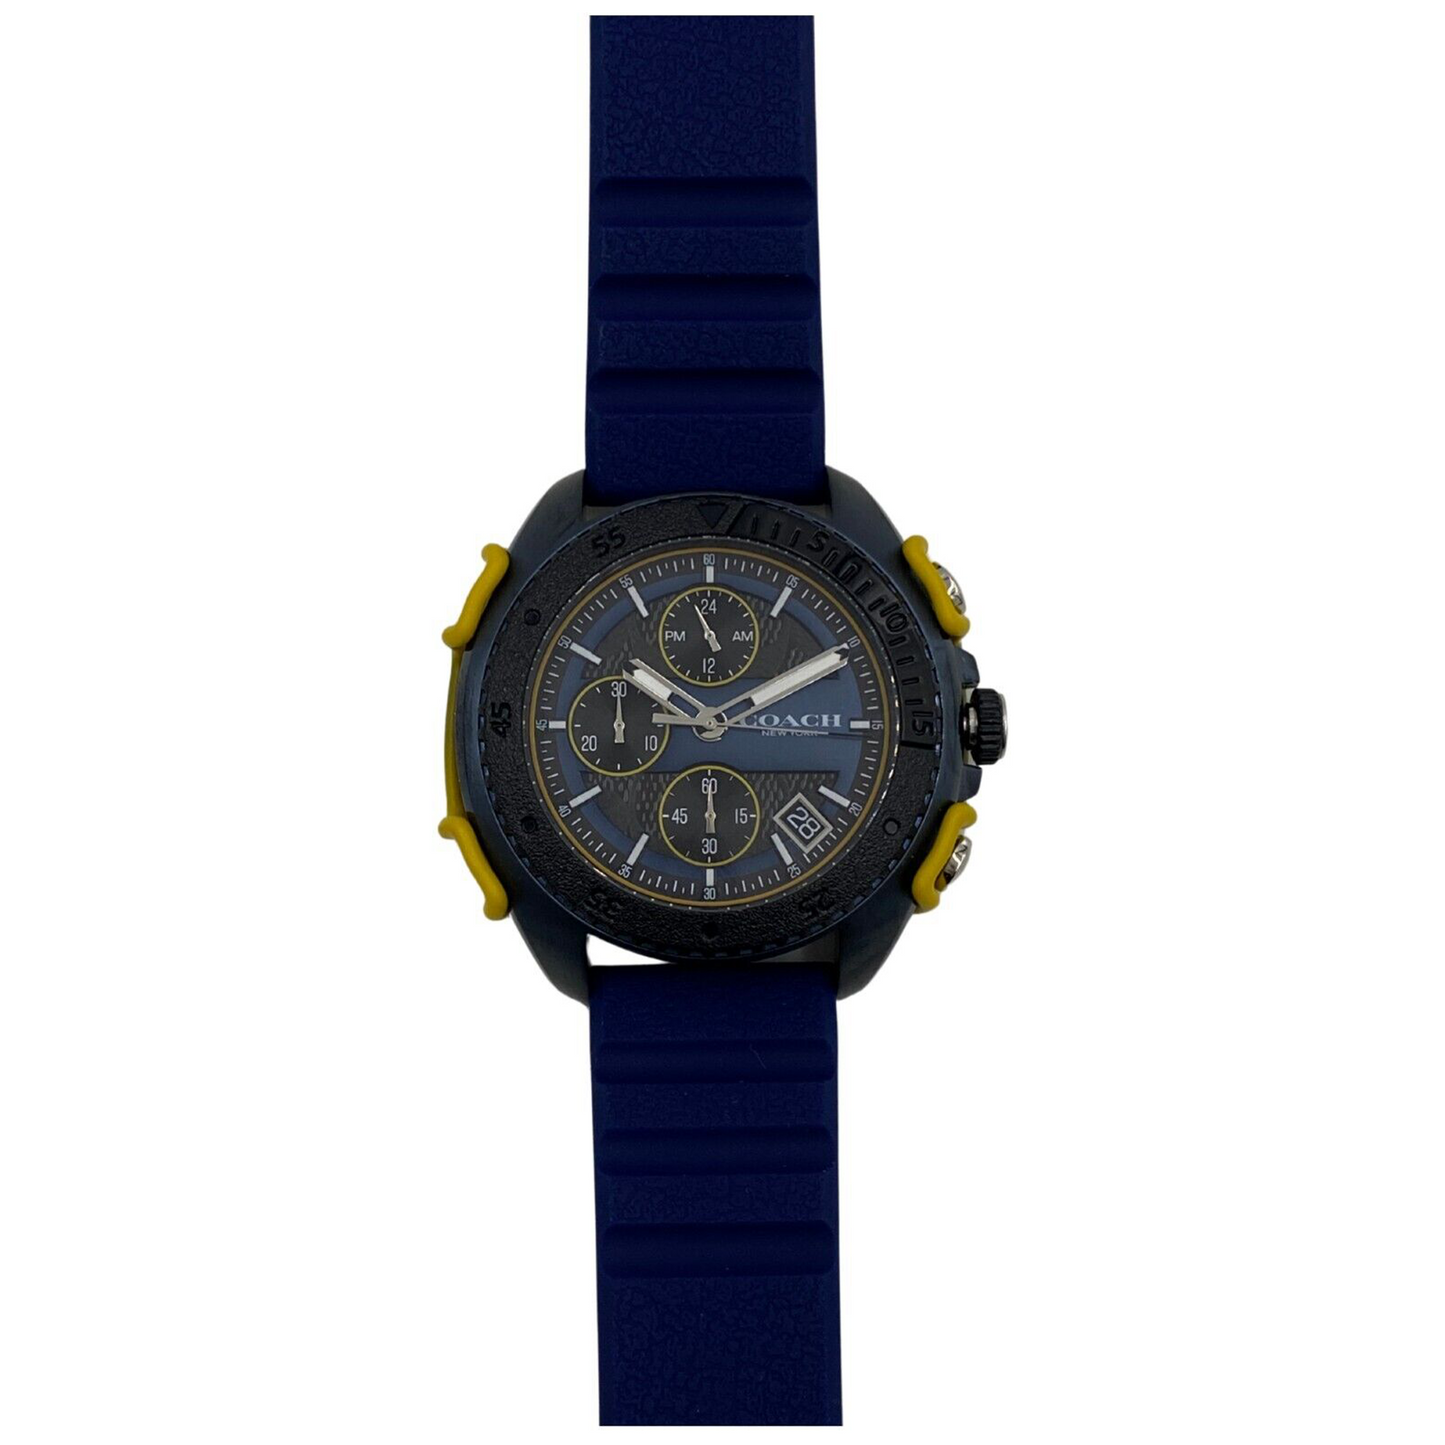 Coach Black Dial Blue Silicone Date Chronograph Men's Watch - 14602454 - 885997347709 